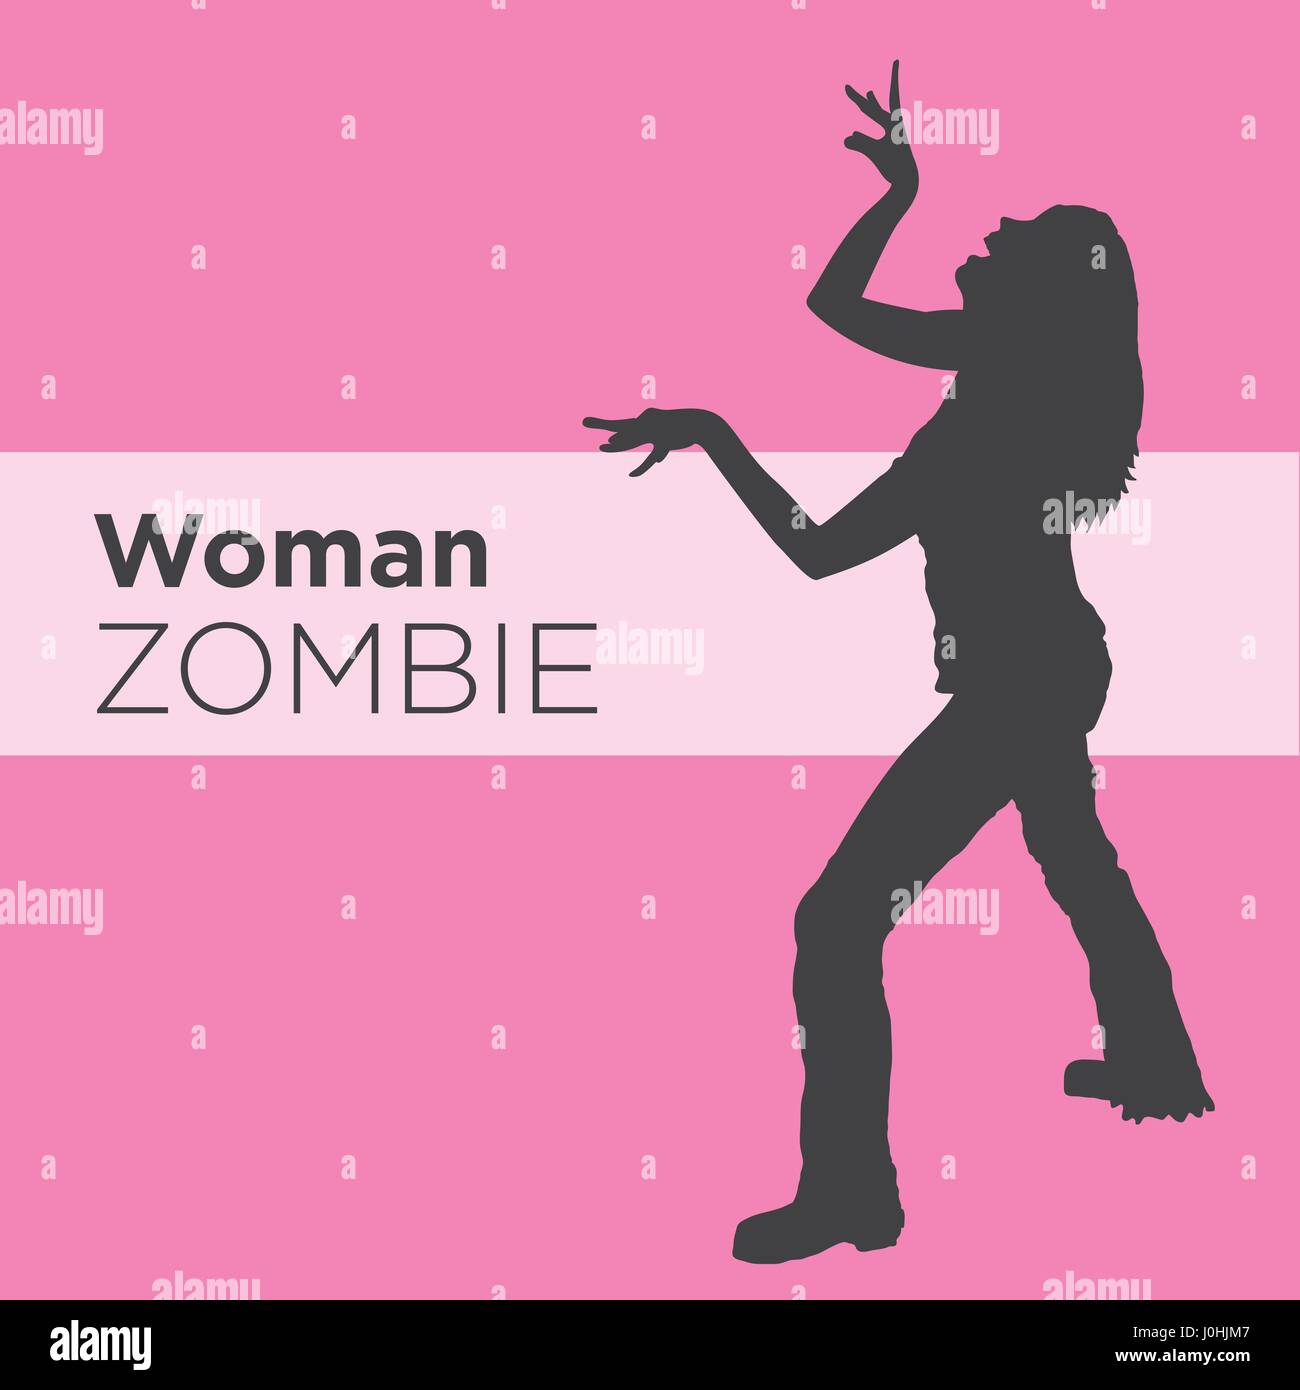 Zombie Silhouette side view images Stock Vector